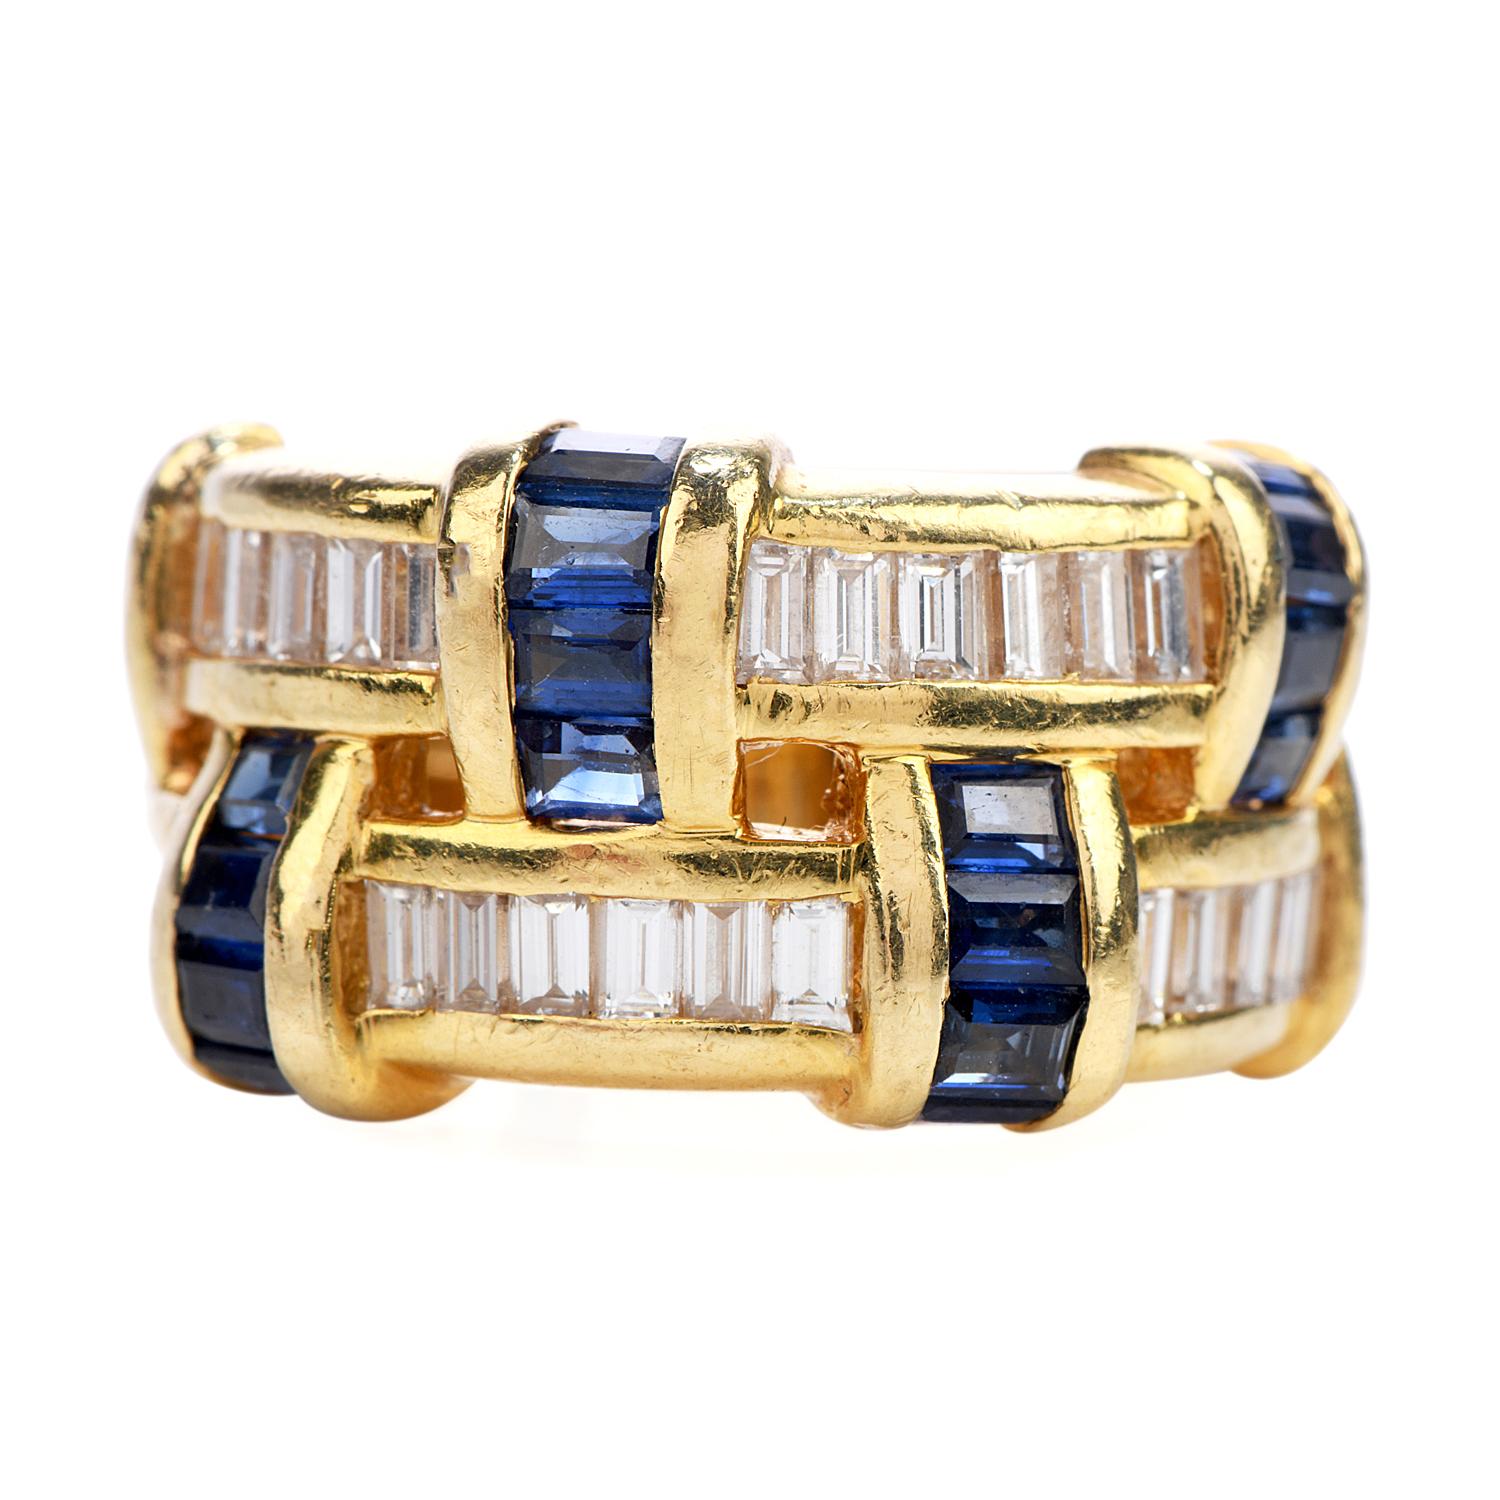  1980s Vintage Keypell wide diamond sapphire band ring, in an intricate woven design.

Crafted in 18K yellow gold and featuring (22) baguette-cut diamonds weighing approximately 1.00 carats (G-H color and VS clarity) plus (26) baguette-cut Blue